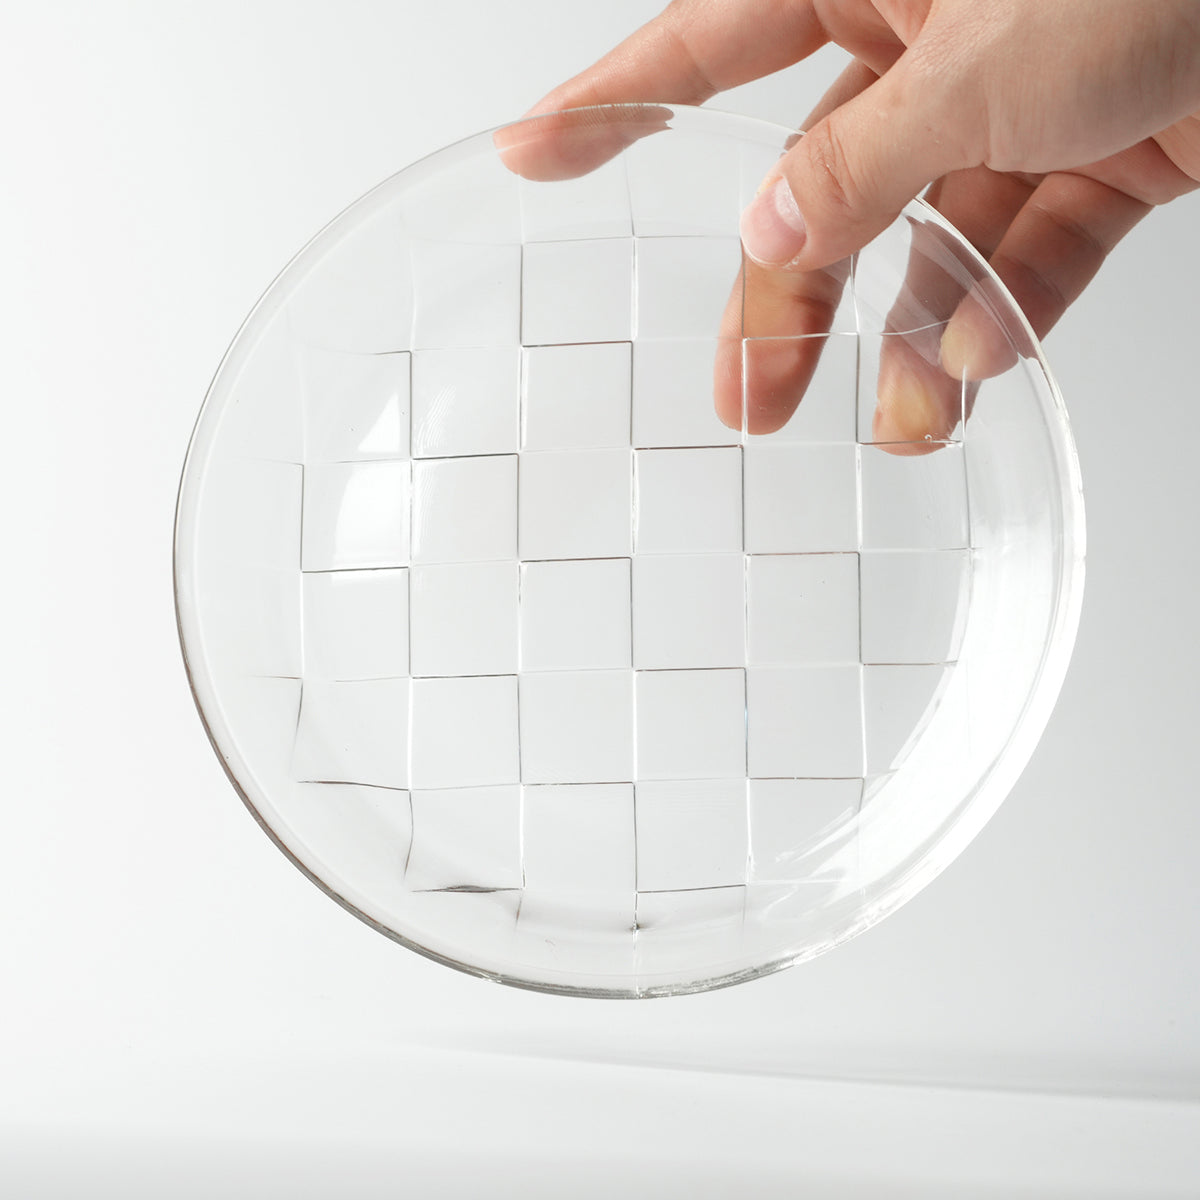 Recycled glass plate from Taiwanese craftmanship. Golden Pin Design Award. Glass tableware.